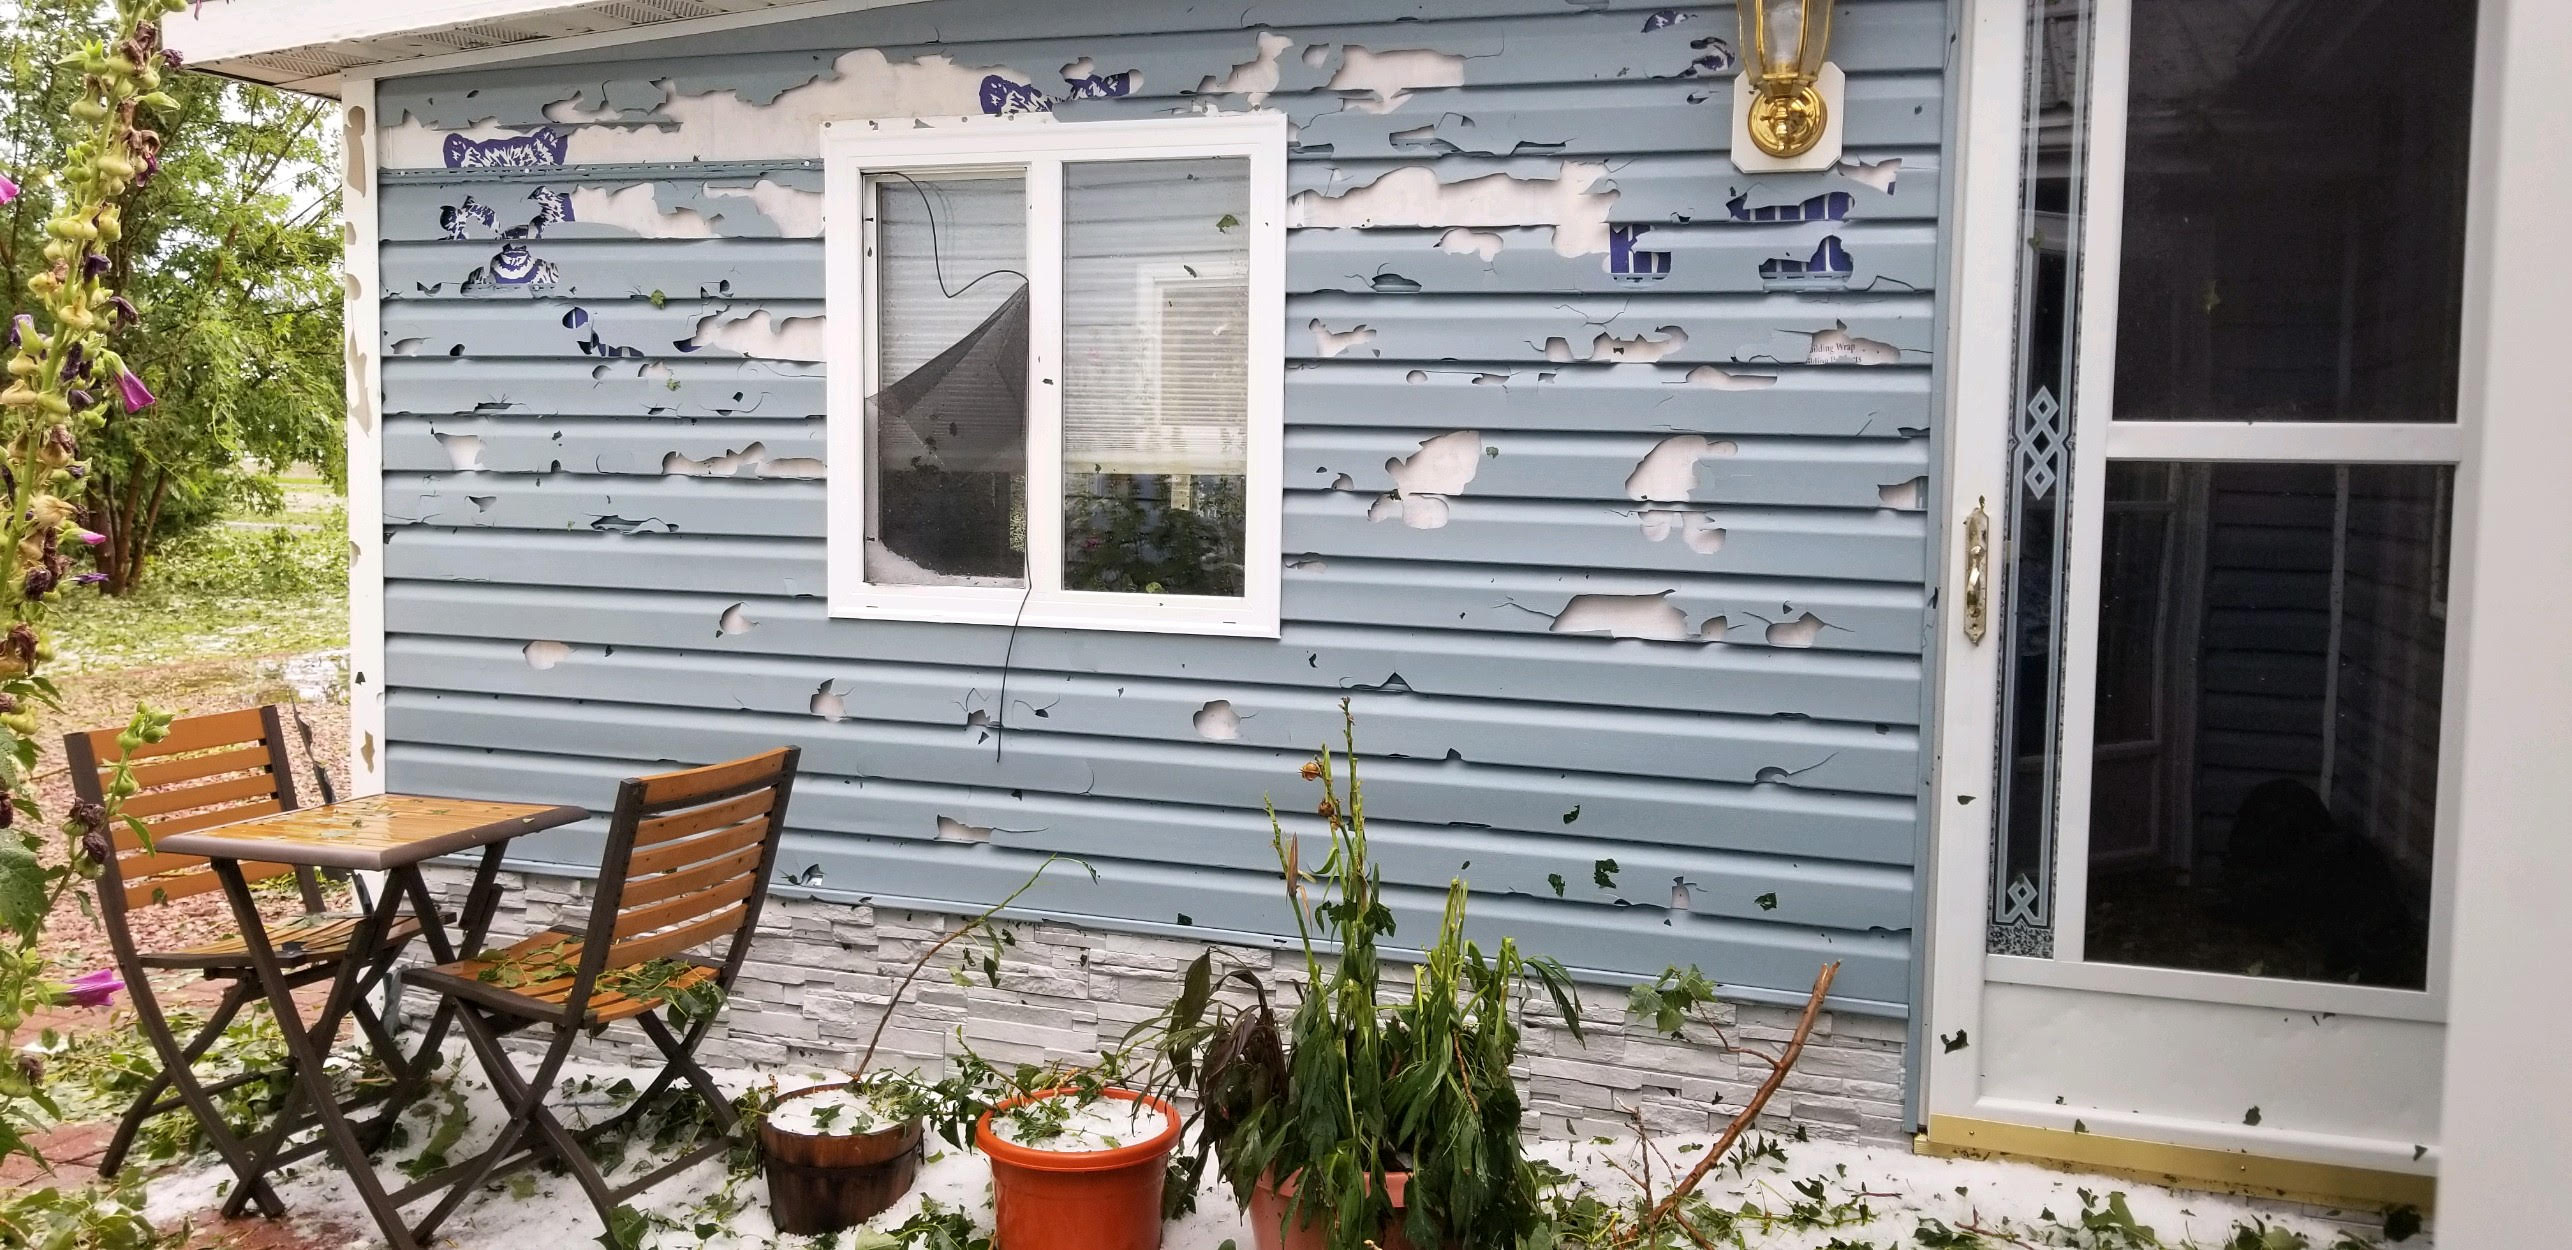 Whitlock Bay area - Hail damaged the siding of a house (Relayed from Edmunds County EM)